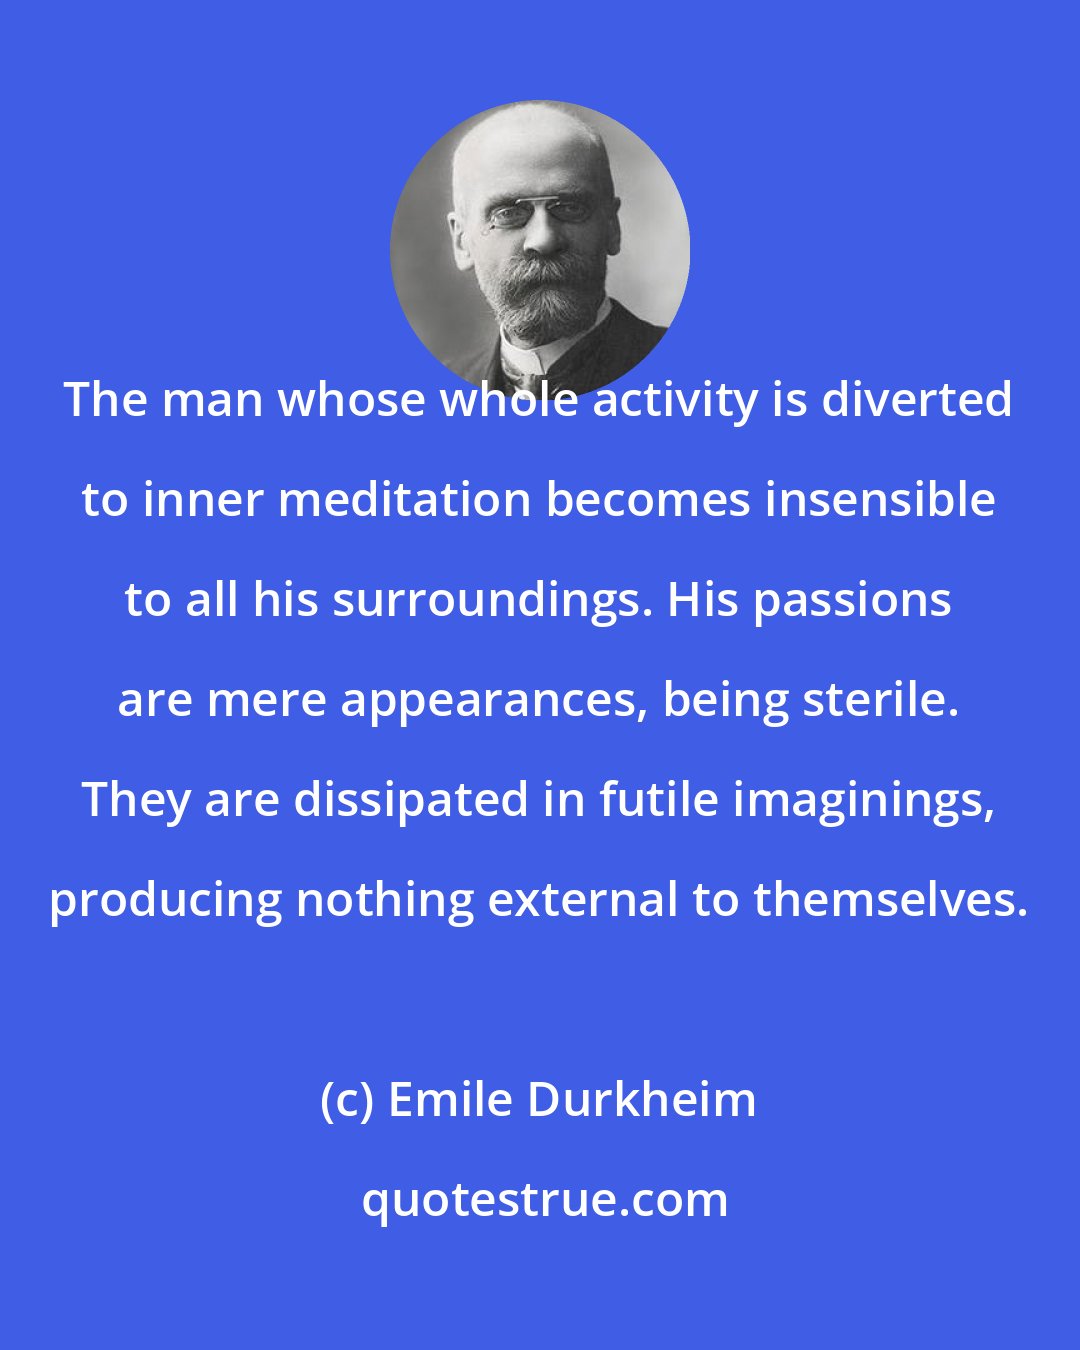 Emile Durkheim: The man whose whole activity is diverted to inner meditation becomes insensible to all his surroundings. His passions are mere appearances, being sterile. They are dissipated in futile imaginings, producing nothing external to themselves.